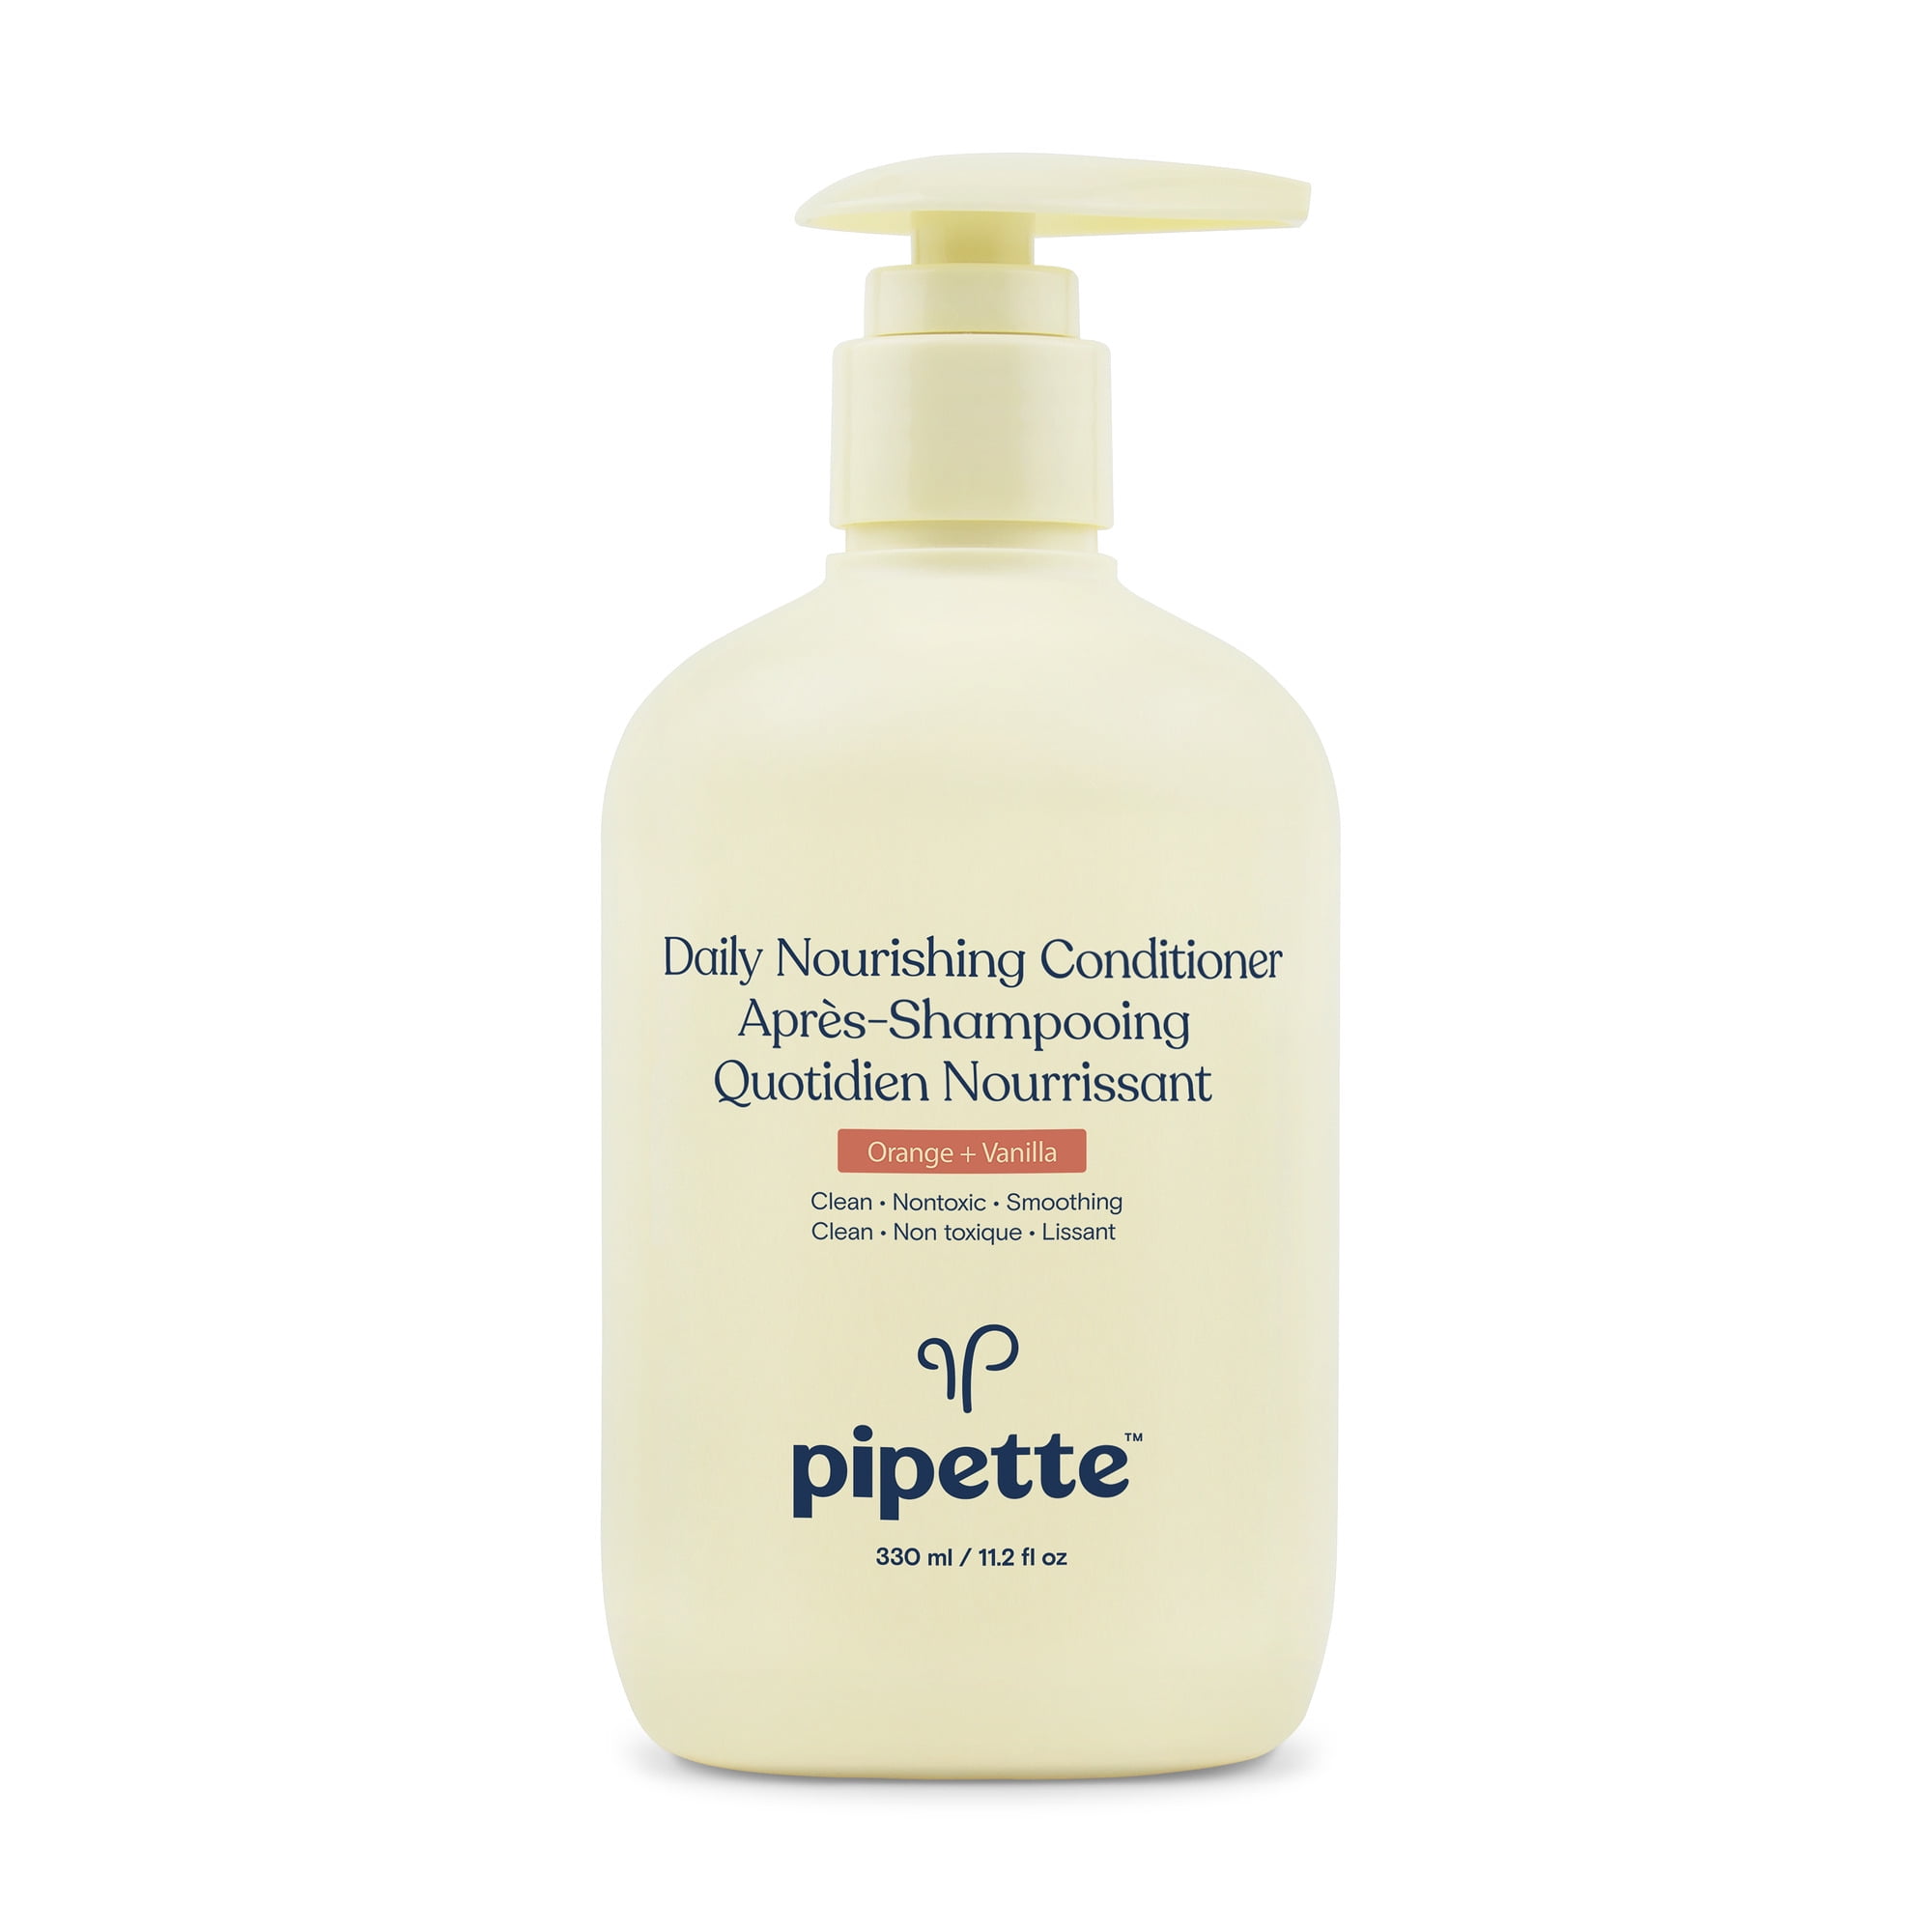 Pipette Kids Daily Nourishing Conditioner, For All Hair Types & Textures, 11.2 fl oz